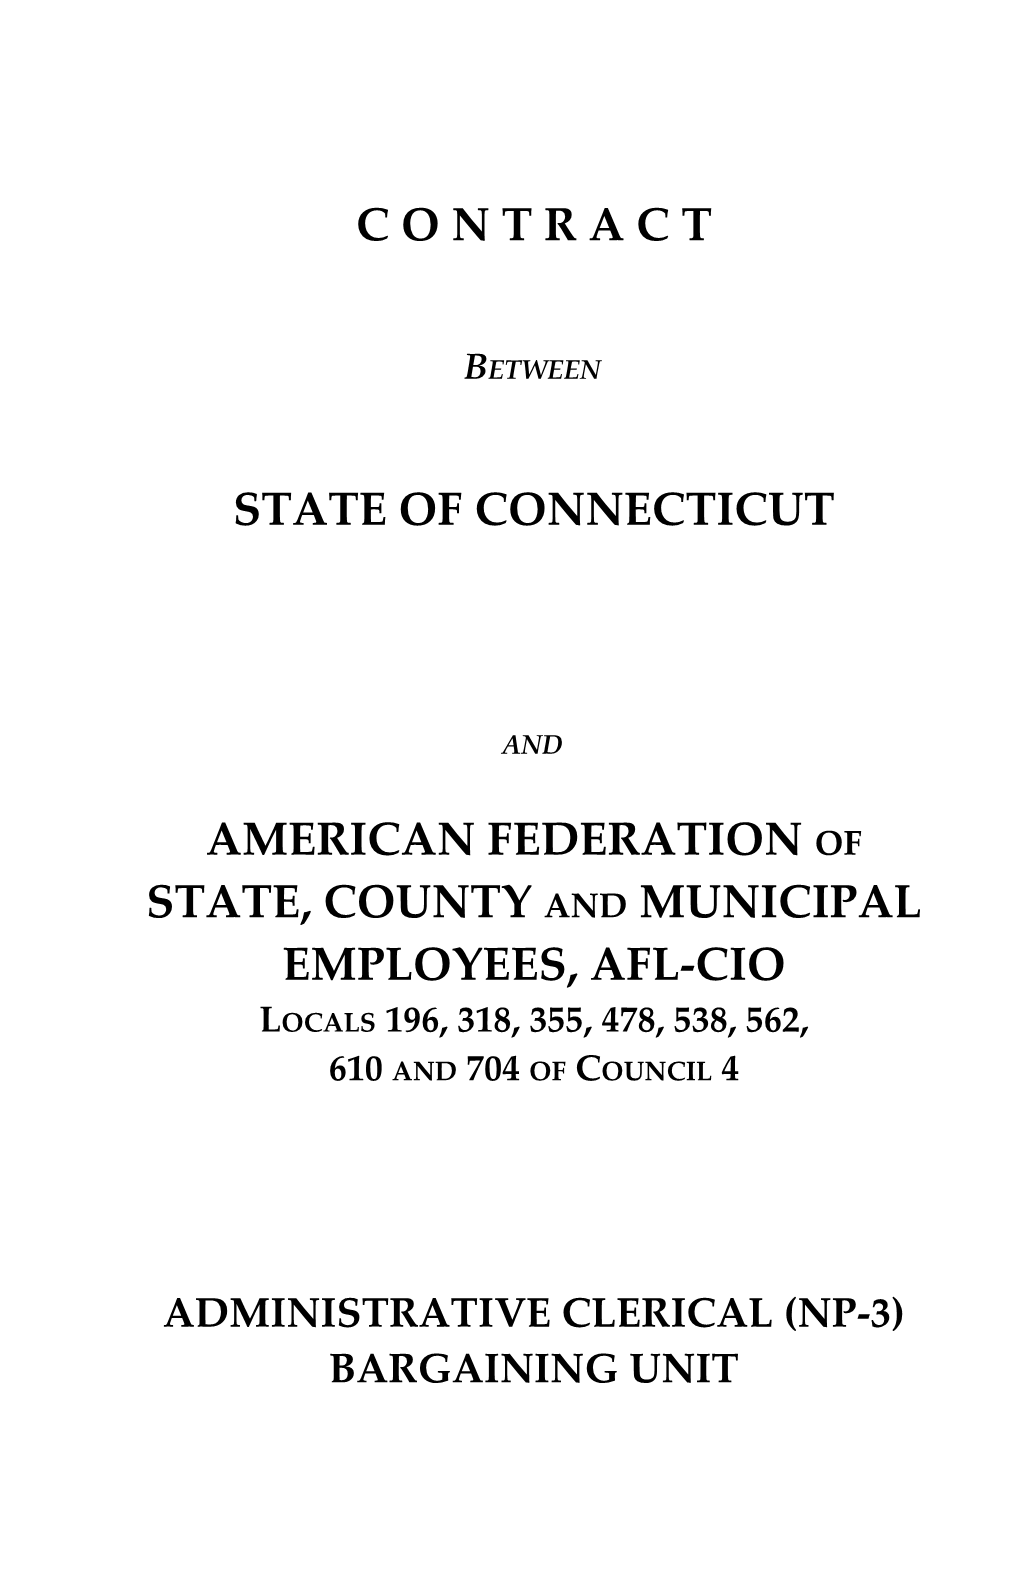 AMERICAN FEDERATION of STATE, COUNTY and MUNICIPAL EMPLOYEES, AFL-CIO